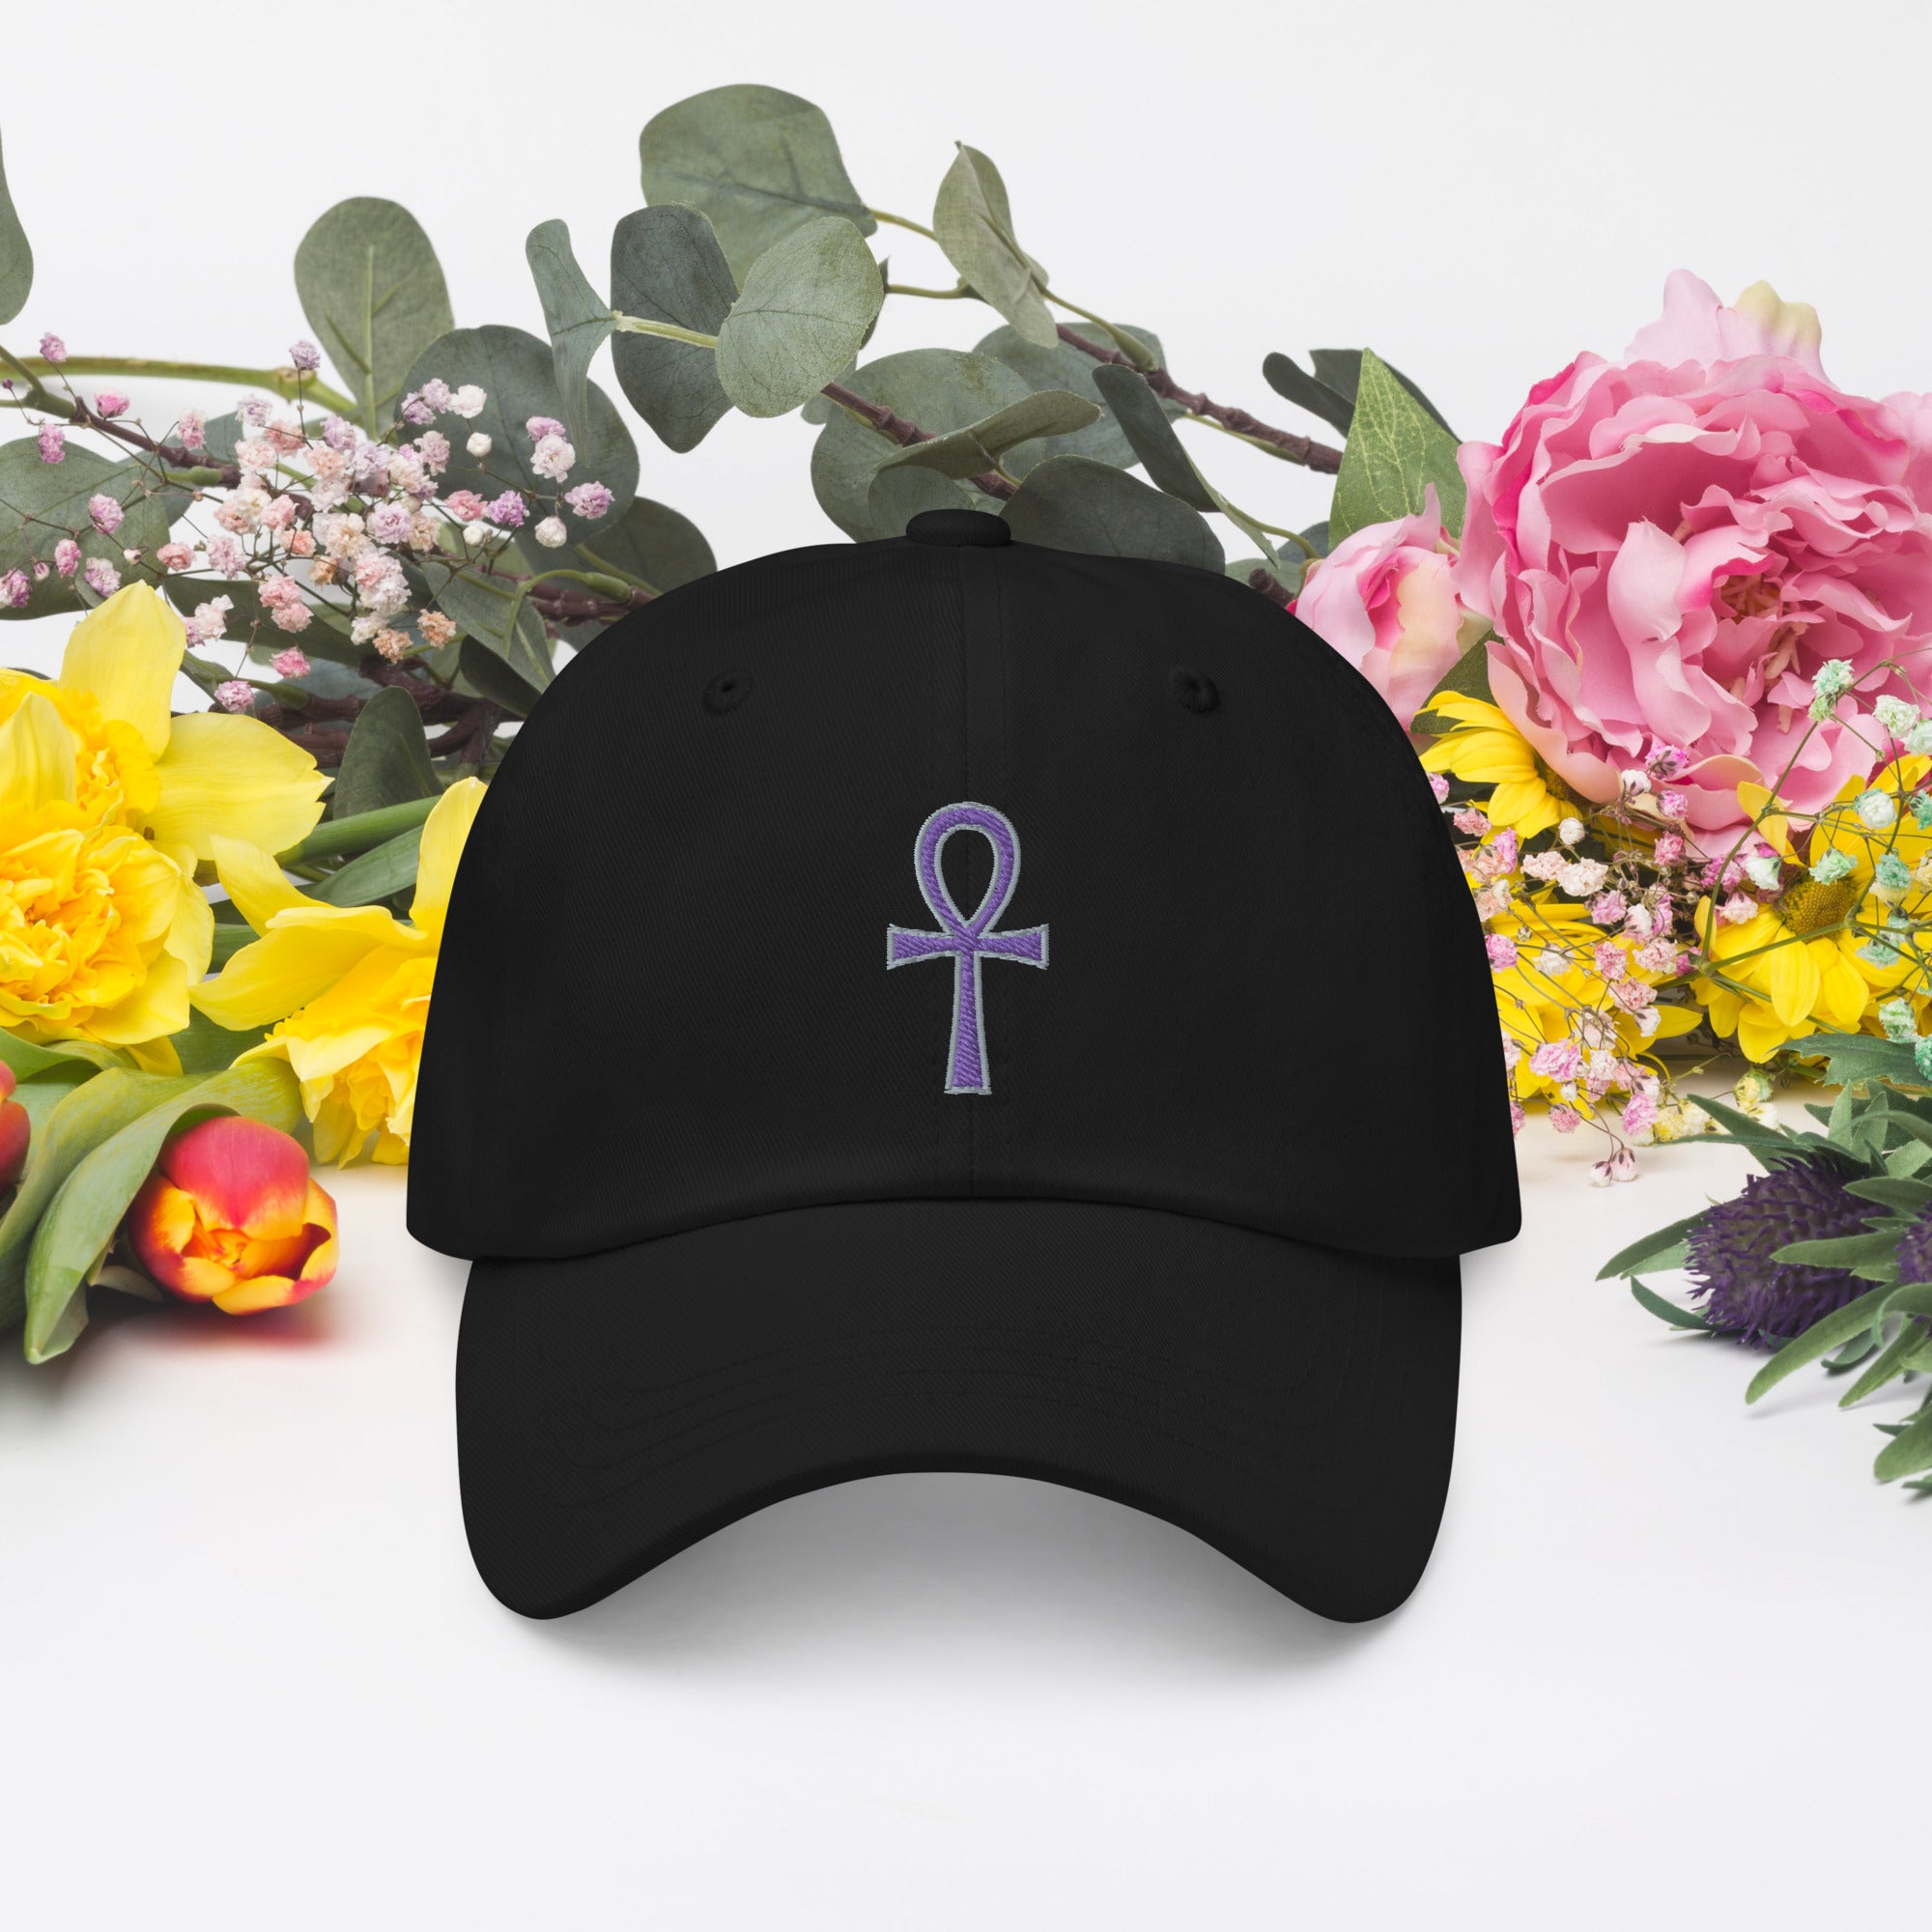 The Key of Life Ankh Ancient Egyptian Culture Embroidered Baseball Cap Dad hat Purple Thread - Edge of Life Designs